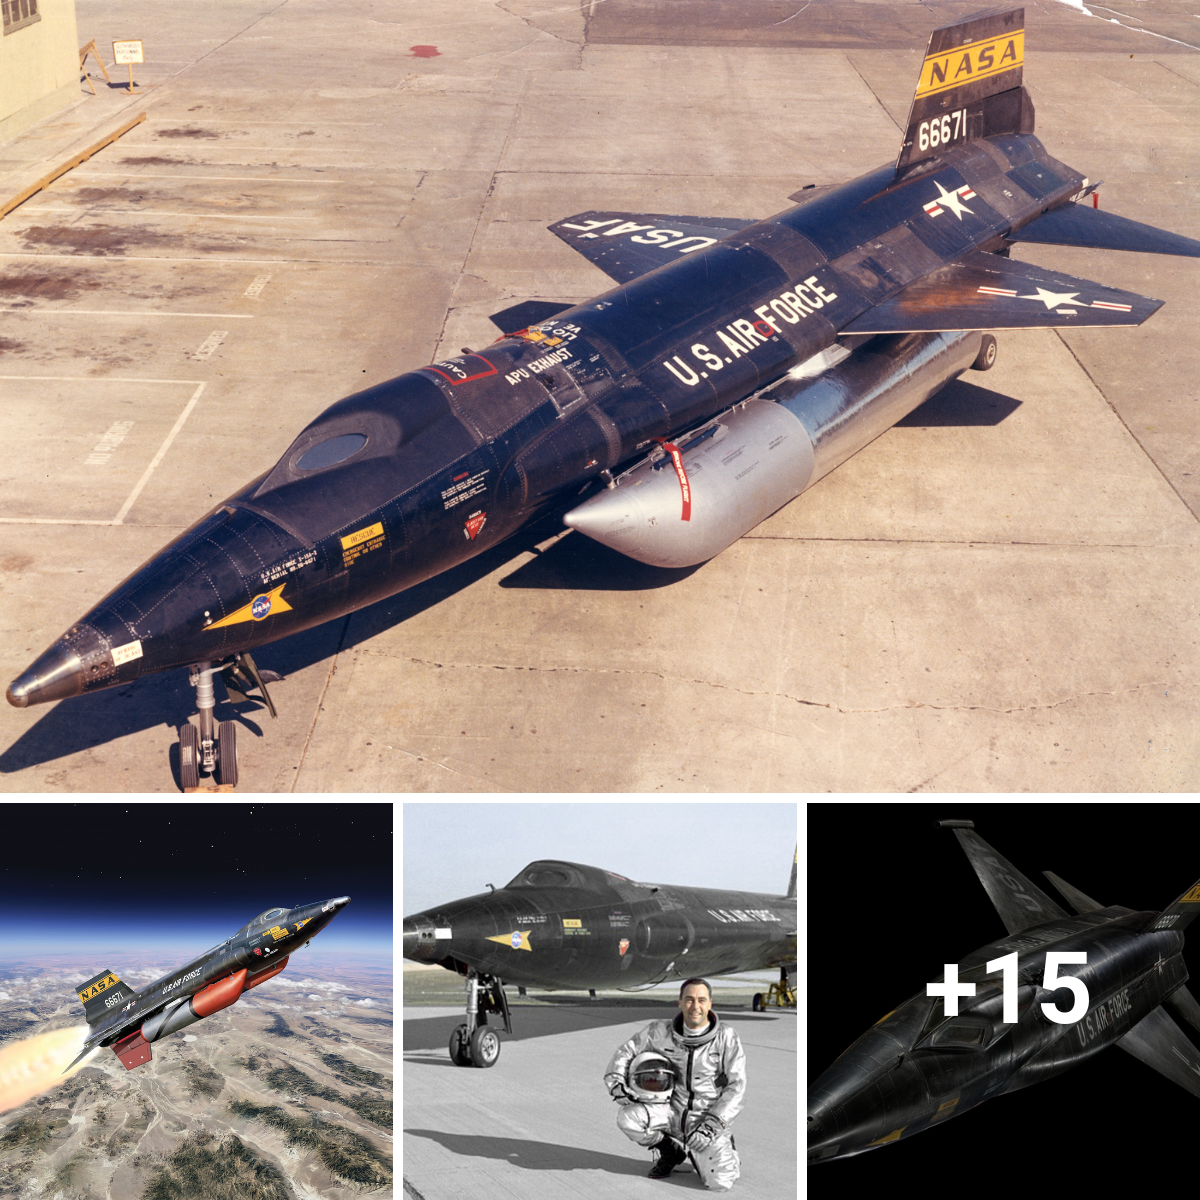 The fastest bomber in the sky, the North American X-15, can reach 4,000 mph.